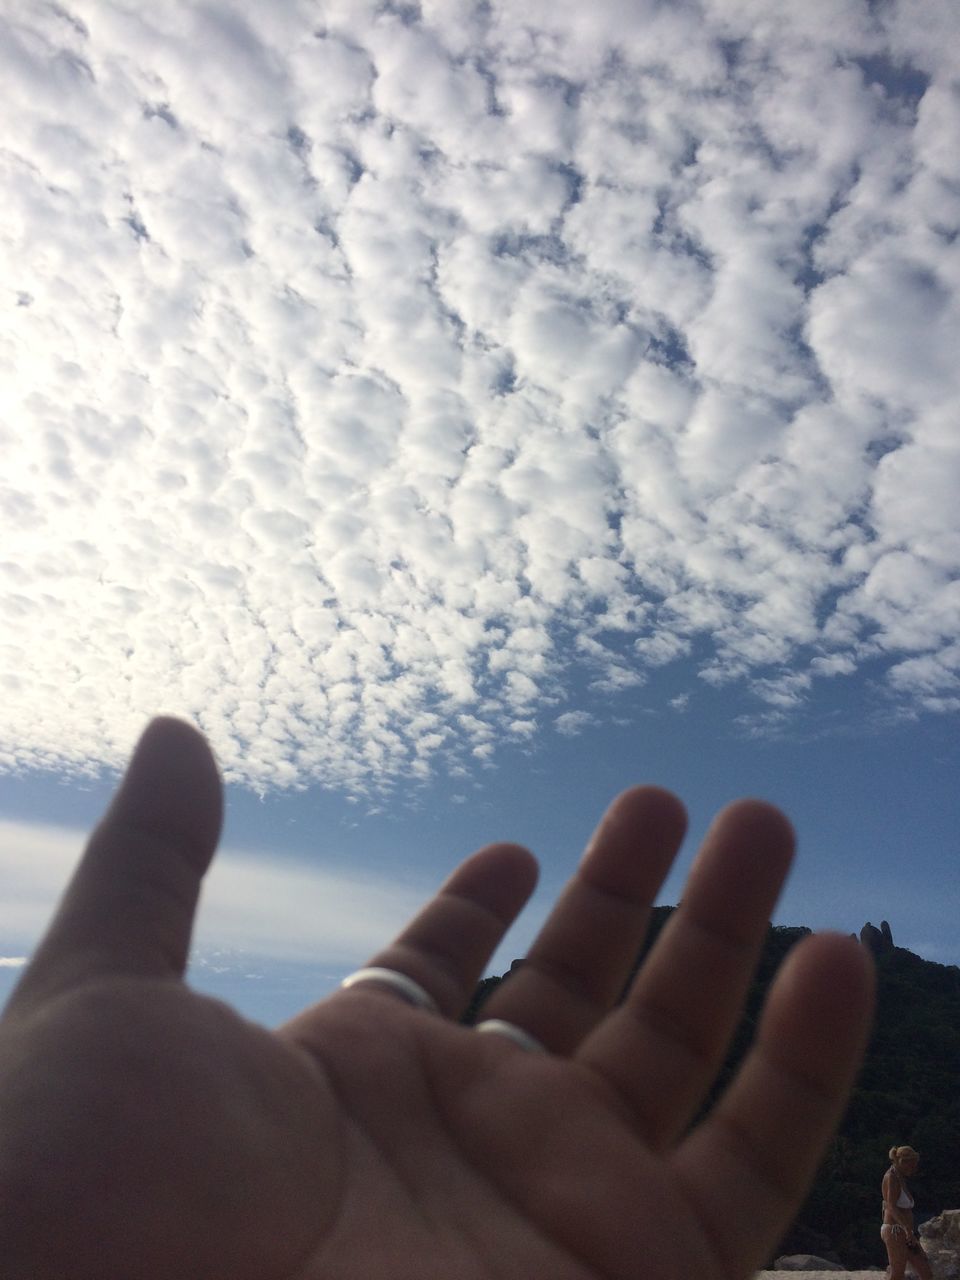 sky, part of, person, lifestyles, leisure activity, cropped, cloud - sky, holding, men, water, blue, cloud, personal perspective, unrecognizable person, day, low section